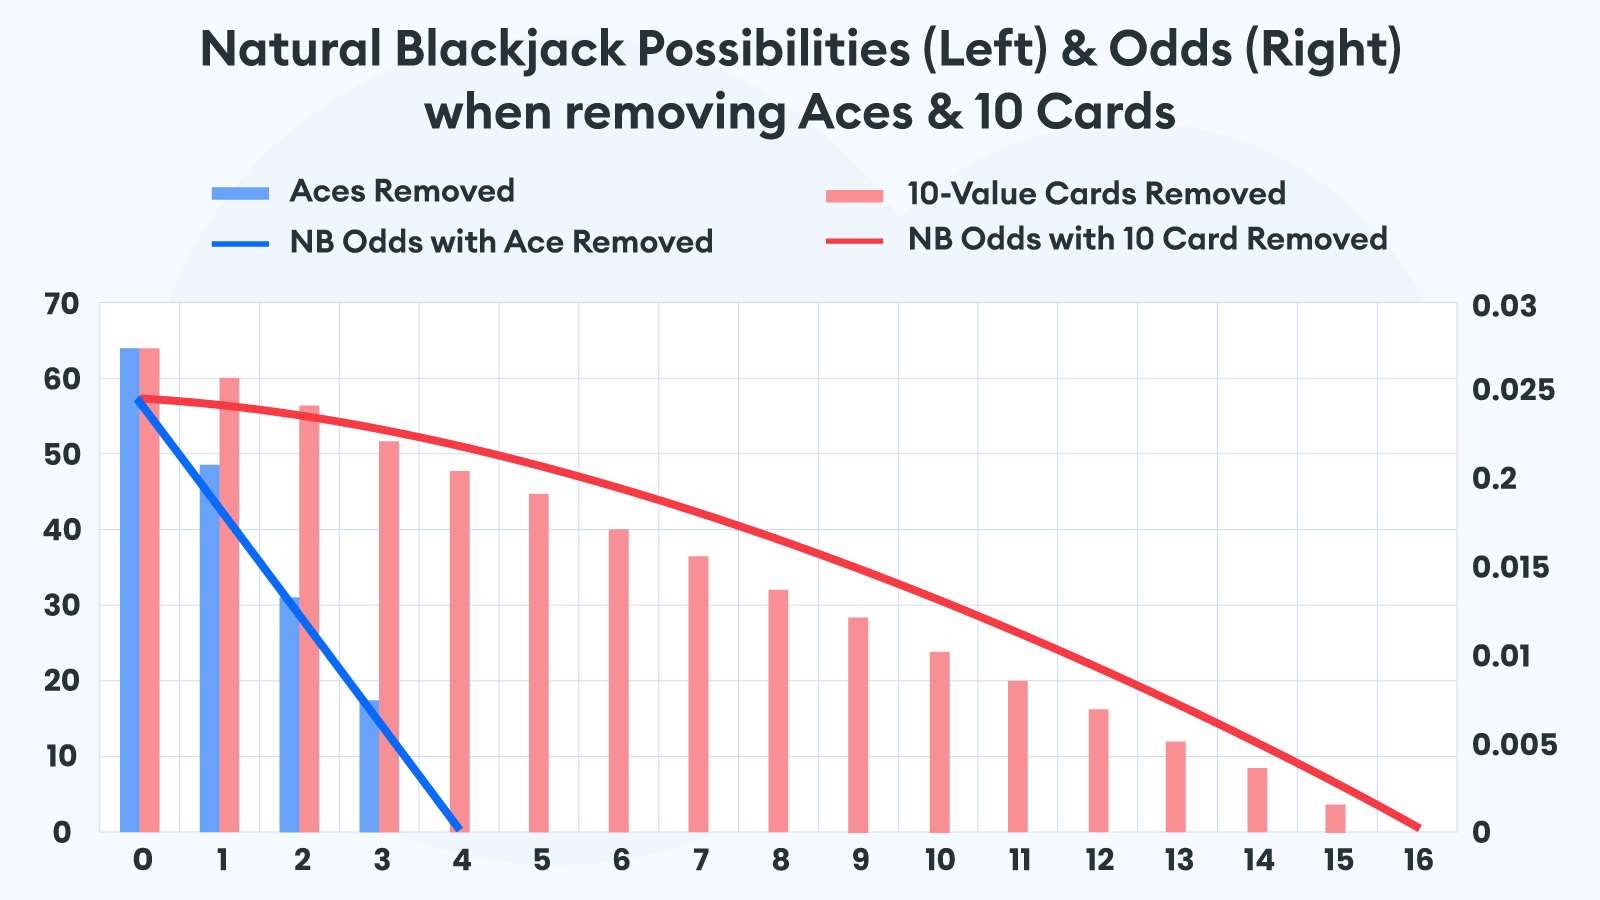 Natural Blackjack Posibilities (Left) & Odds (Right) when removing Aces & 10 Cards